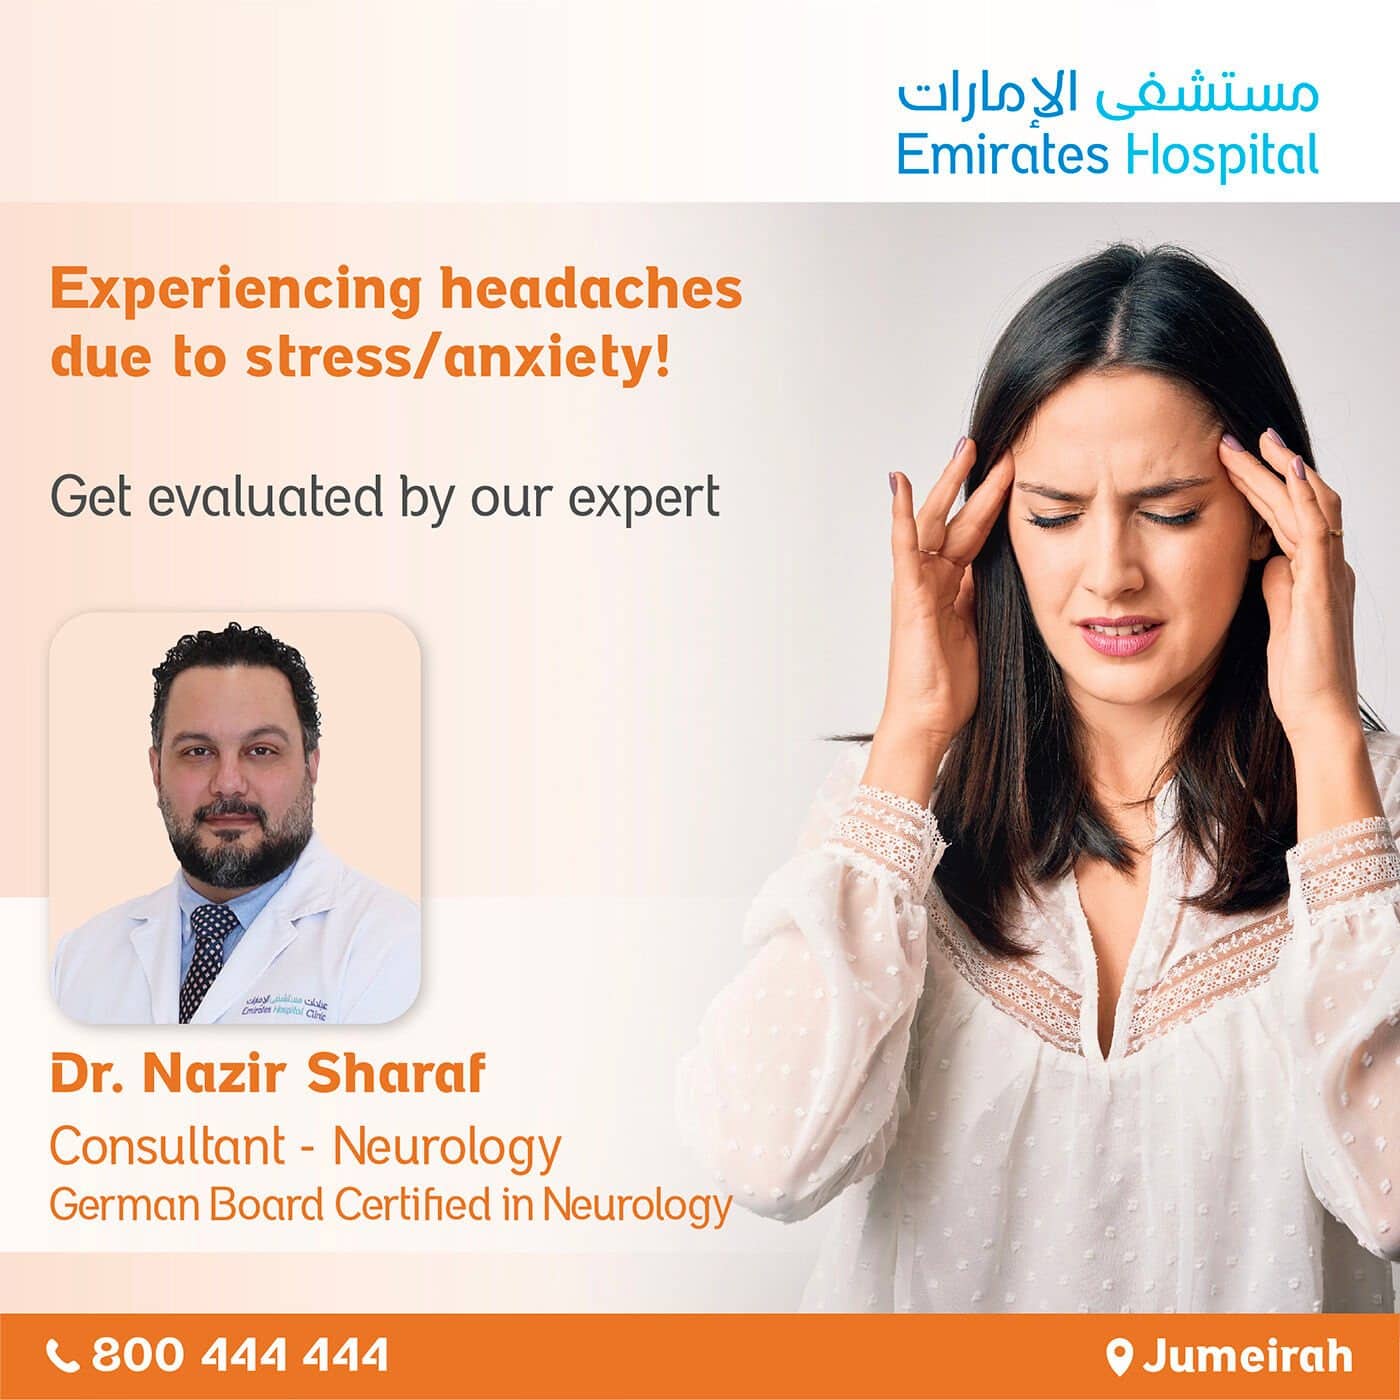 Experiencing headaches due to stress and anxiety